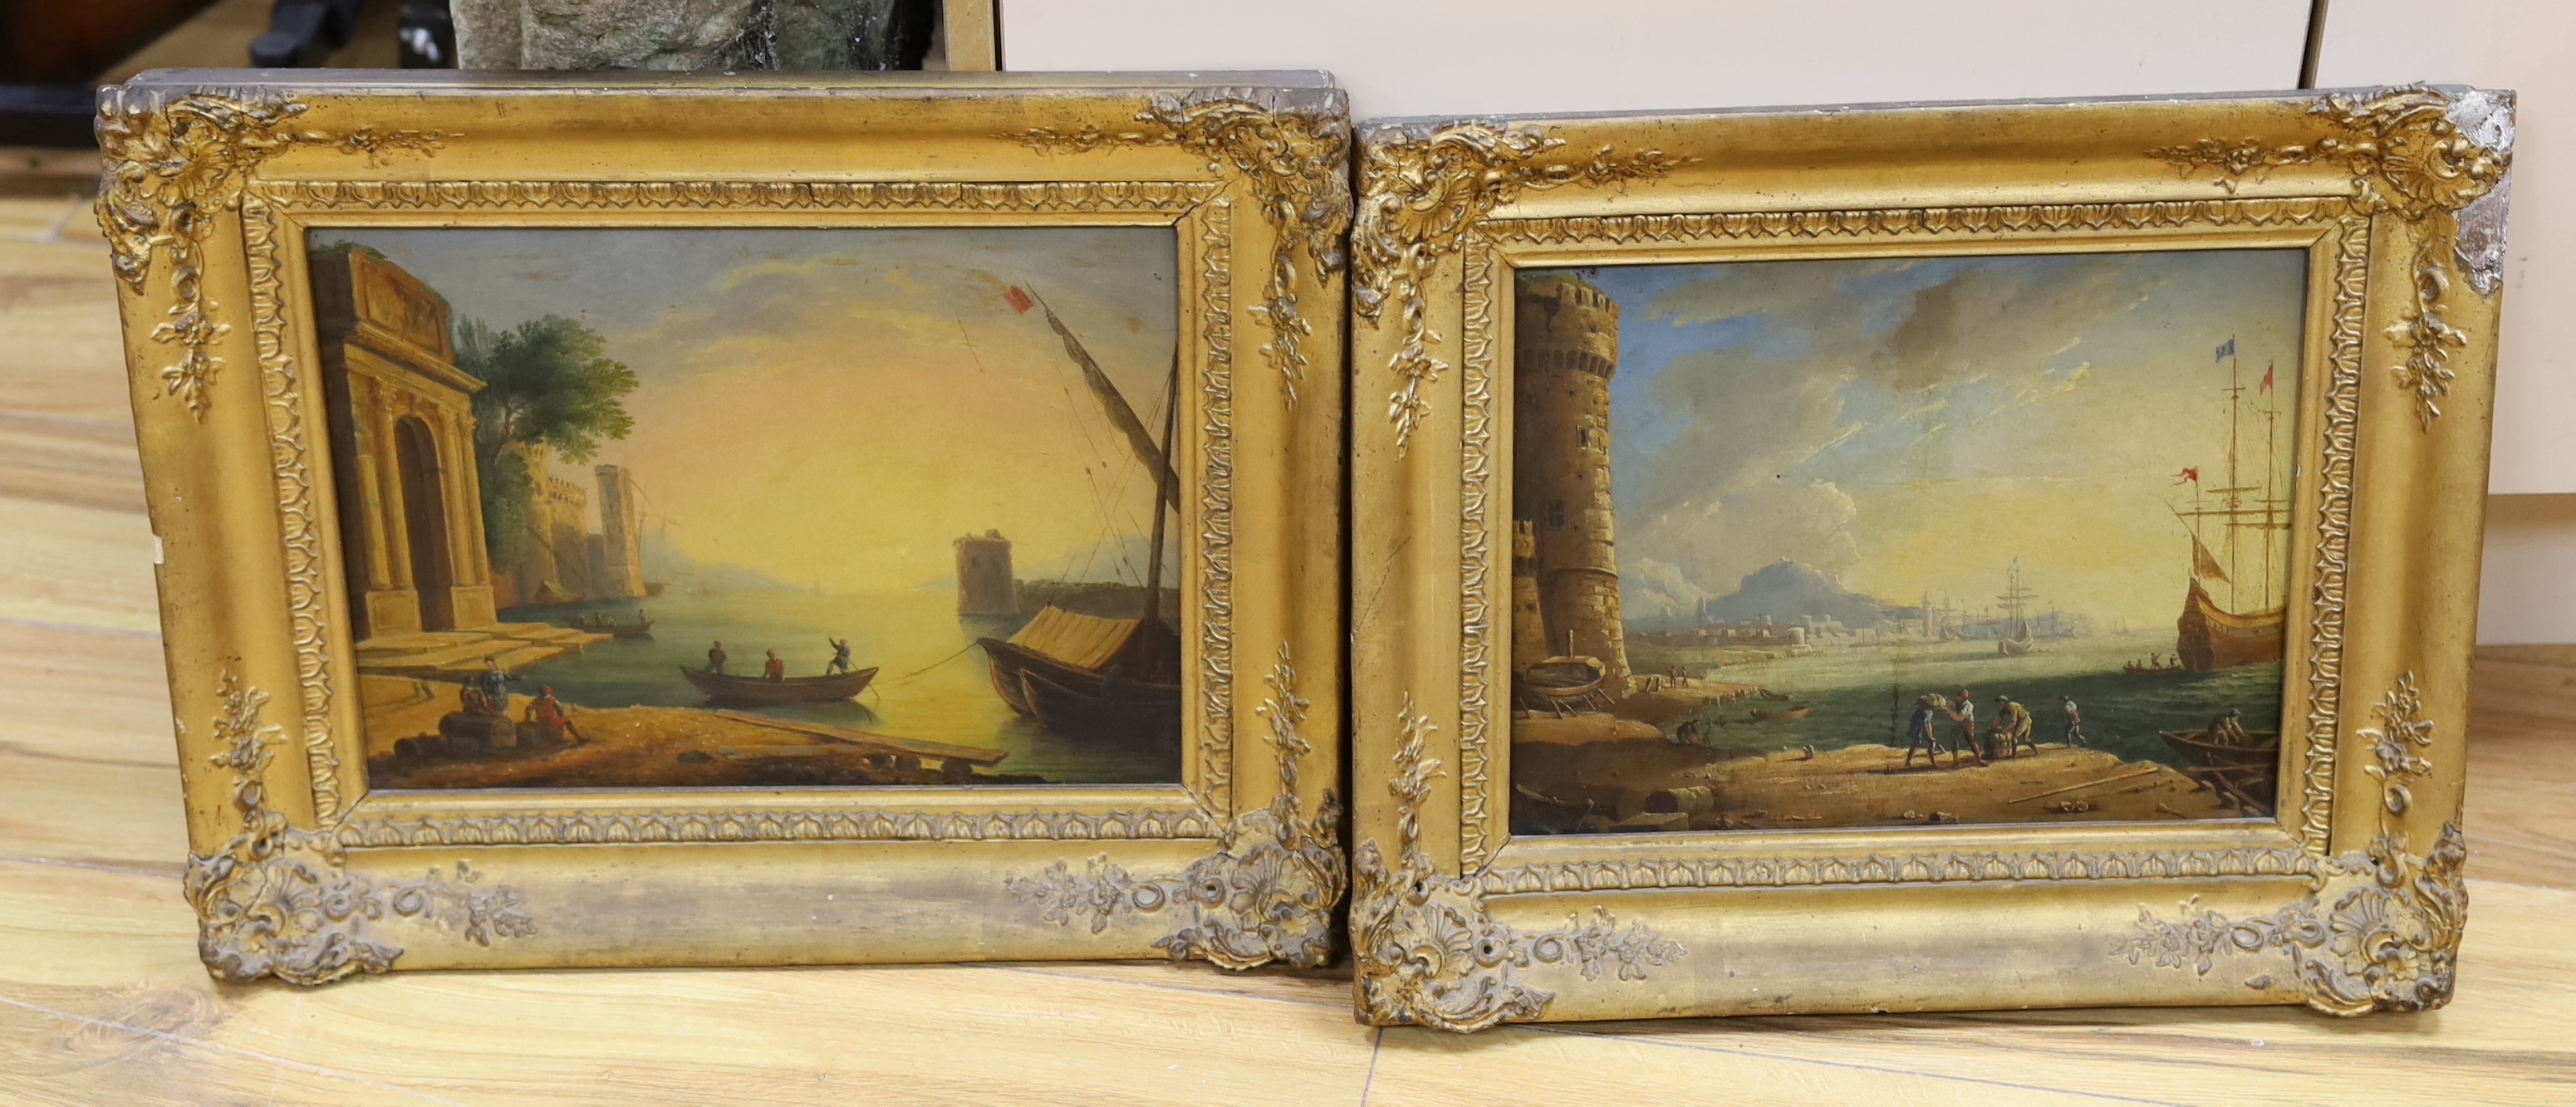 19th century Continental School, pair of oils on board, Harbour scenes with ruins and figures, gilt framed, 23 x 30cm